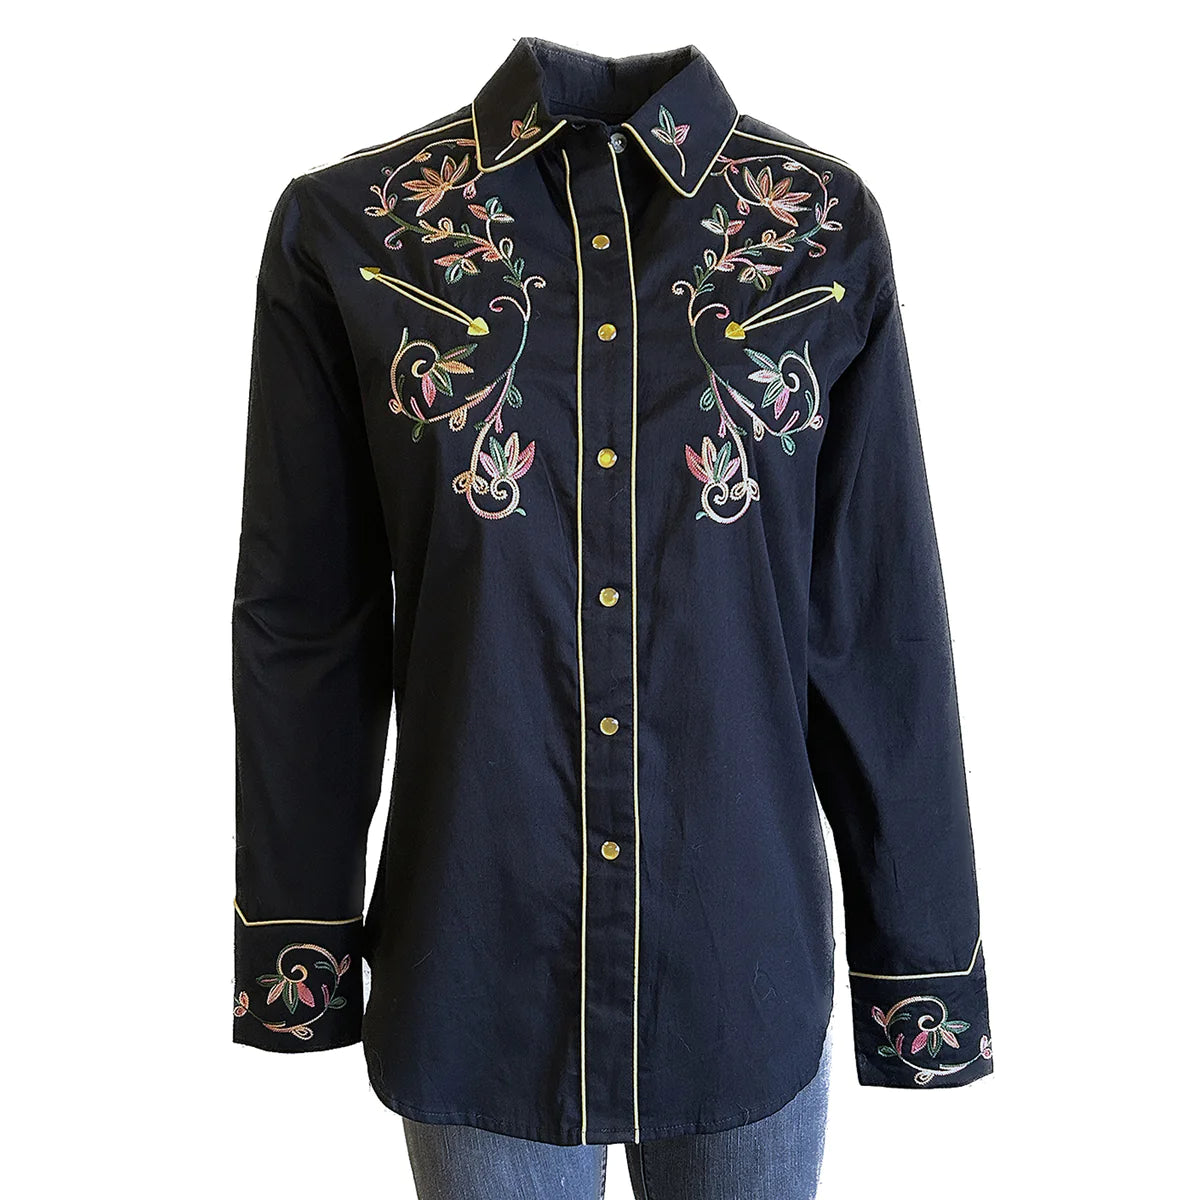 Rockmount Ranch Wear Women's Shirt Variegated Floral on Black Front